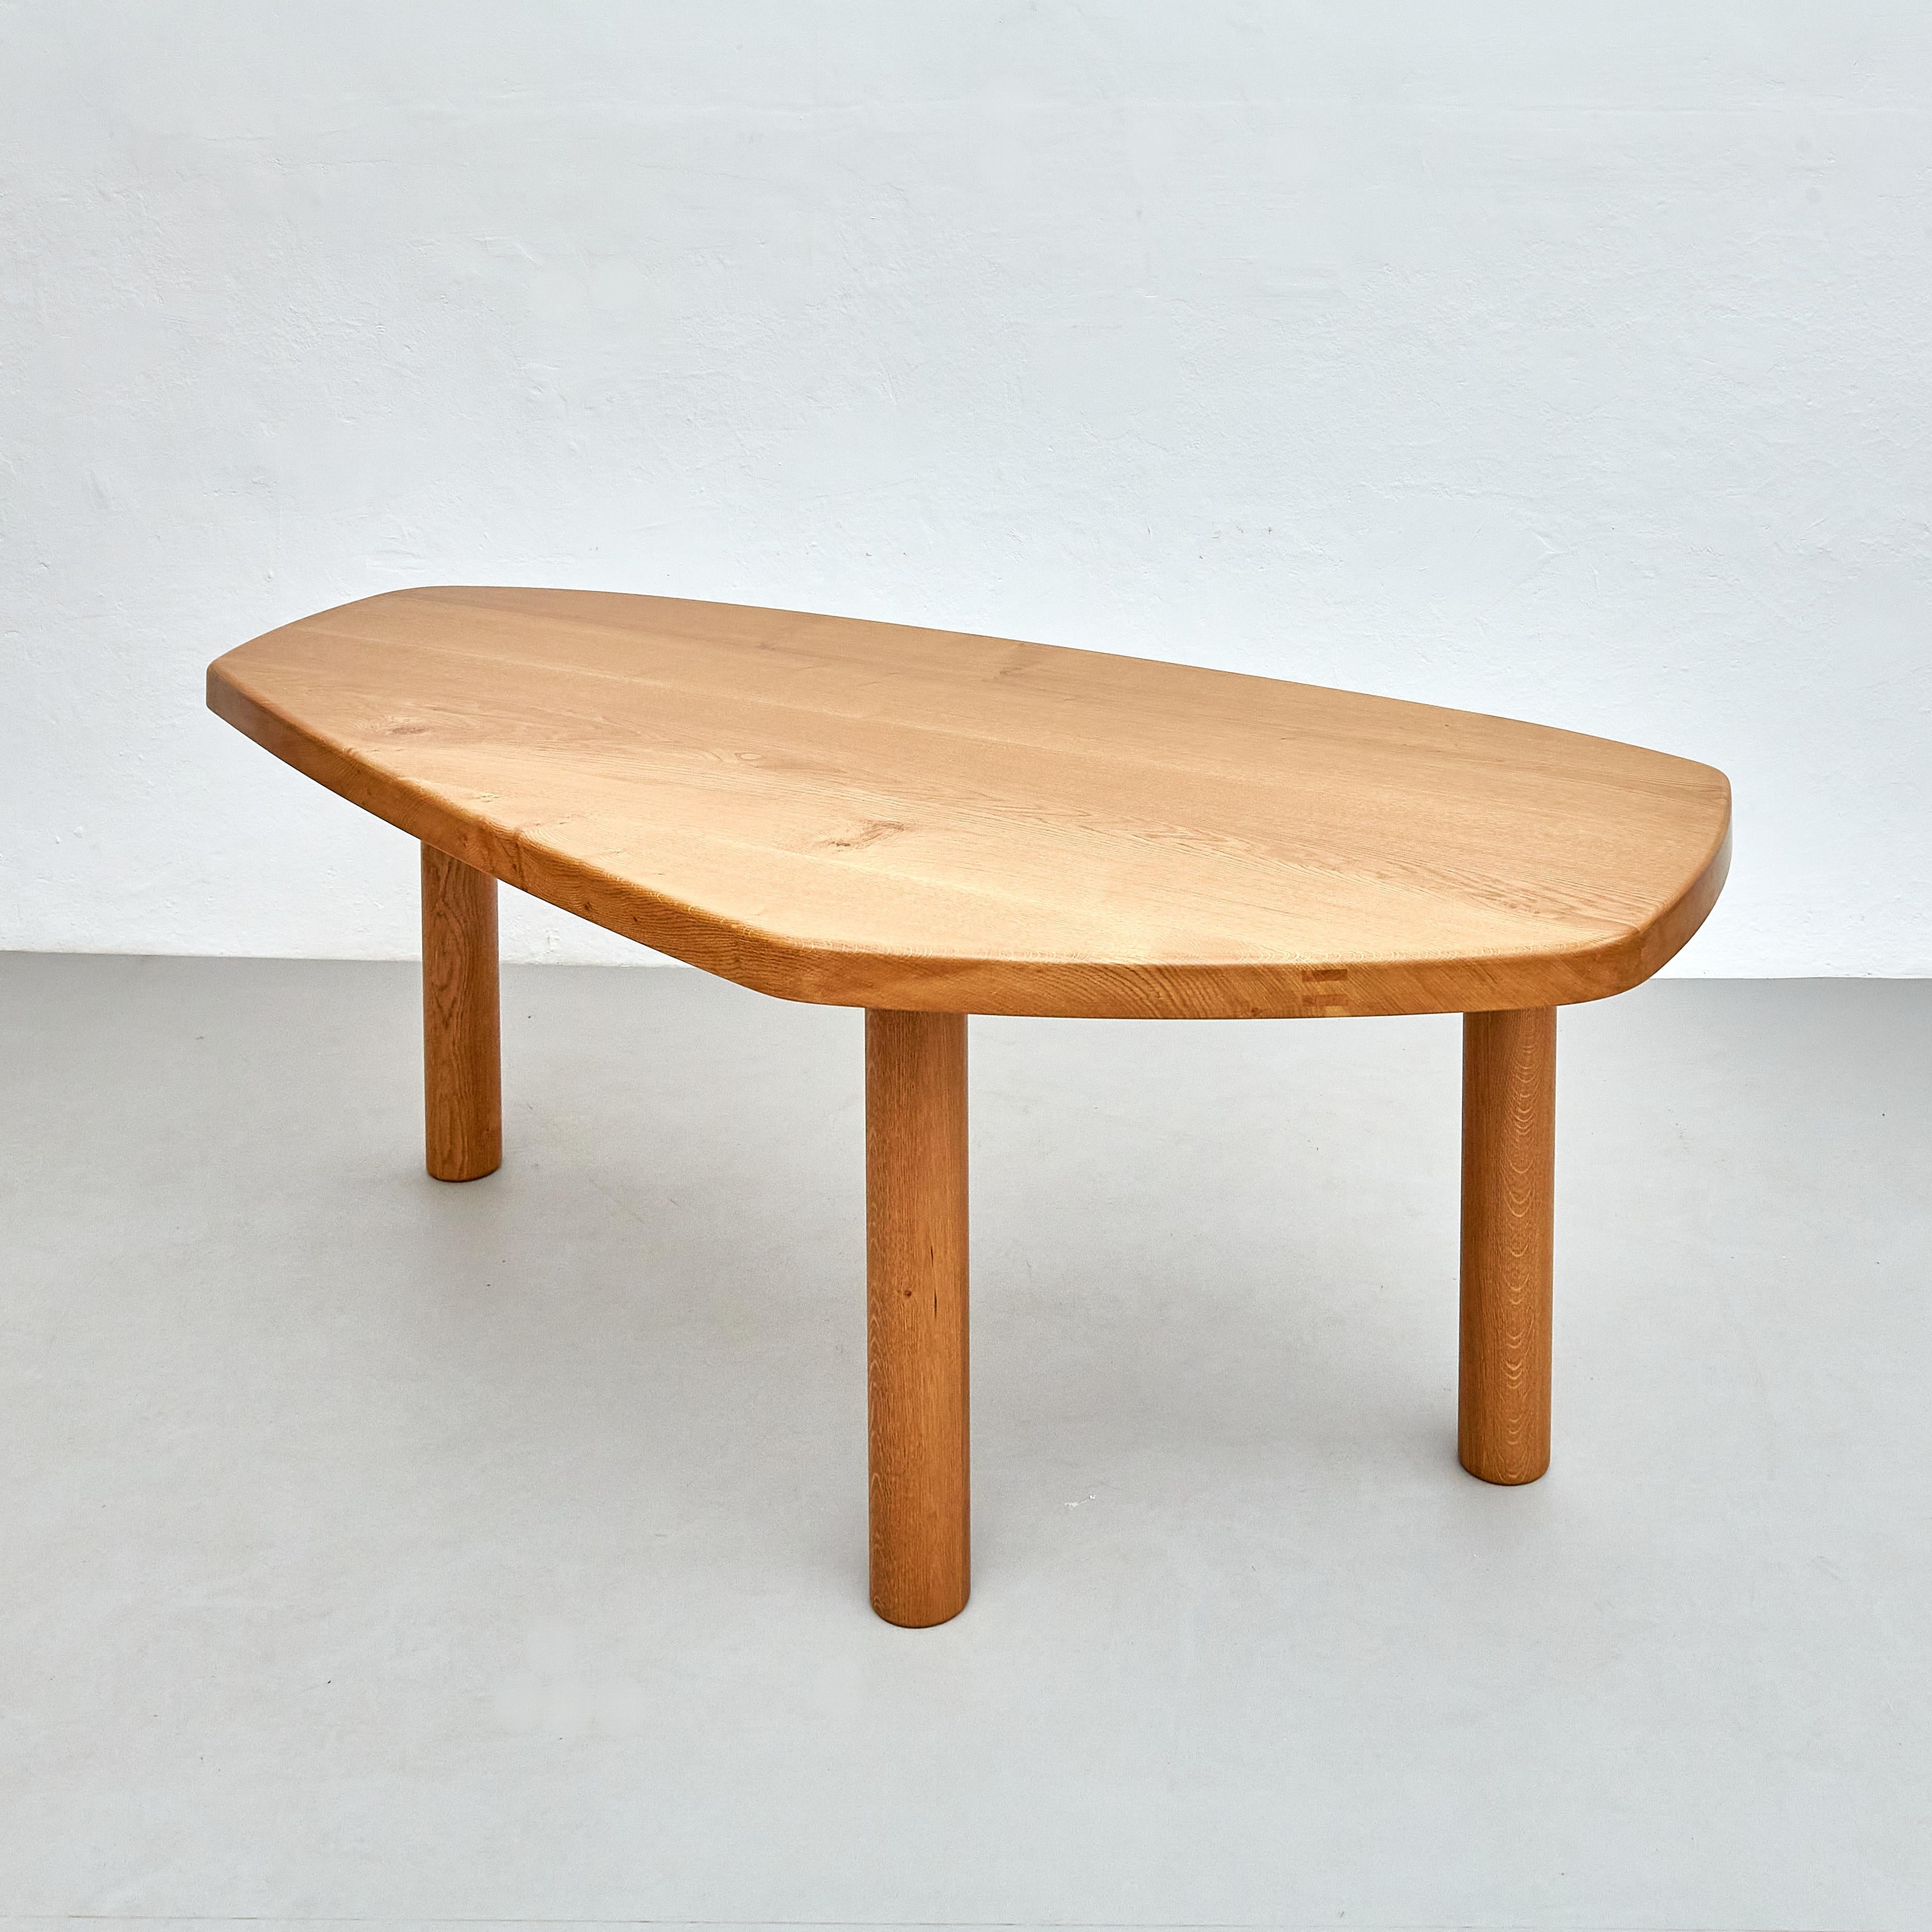 Contemporary Dada Est. Oak Table - Artisan Crafted with Midcentury Design Charm For Sale 2